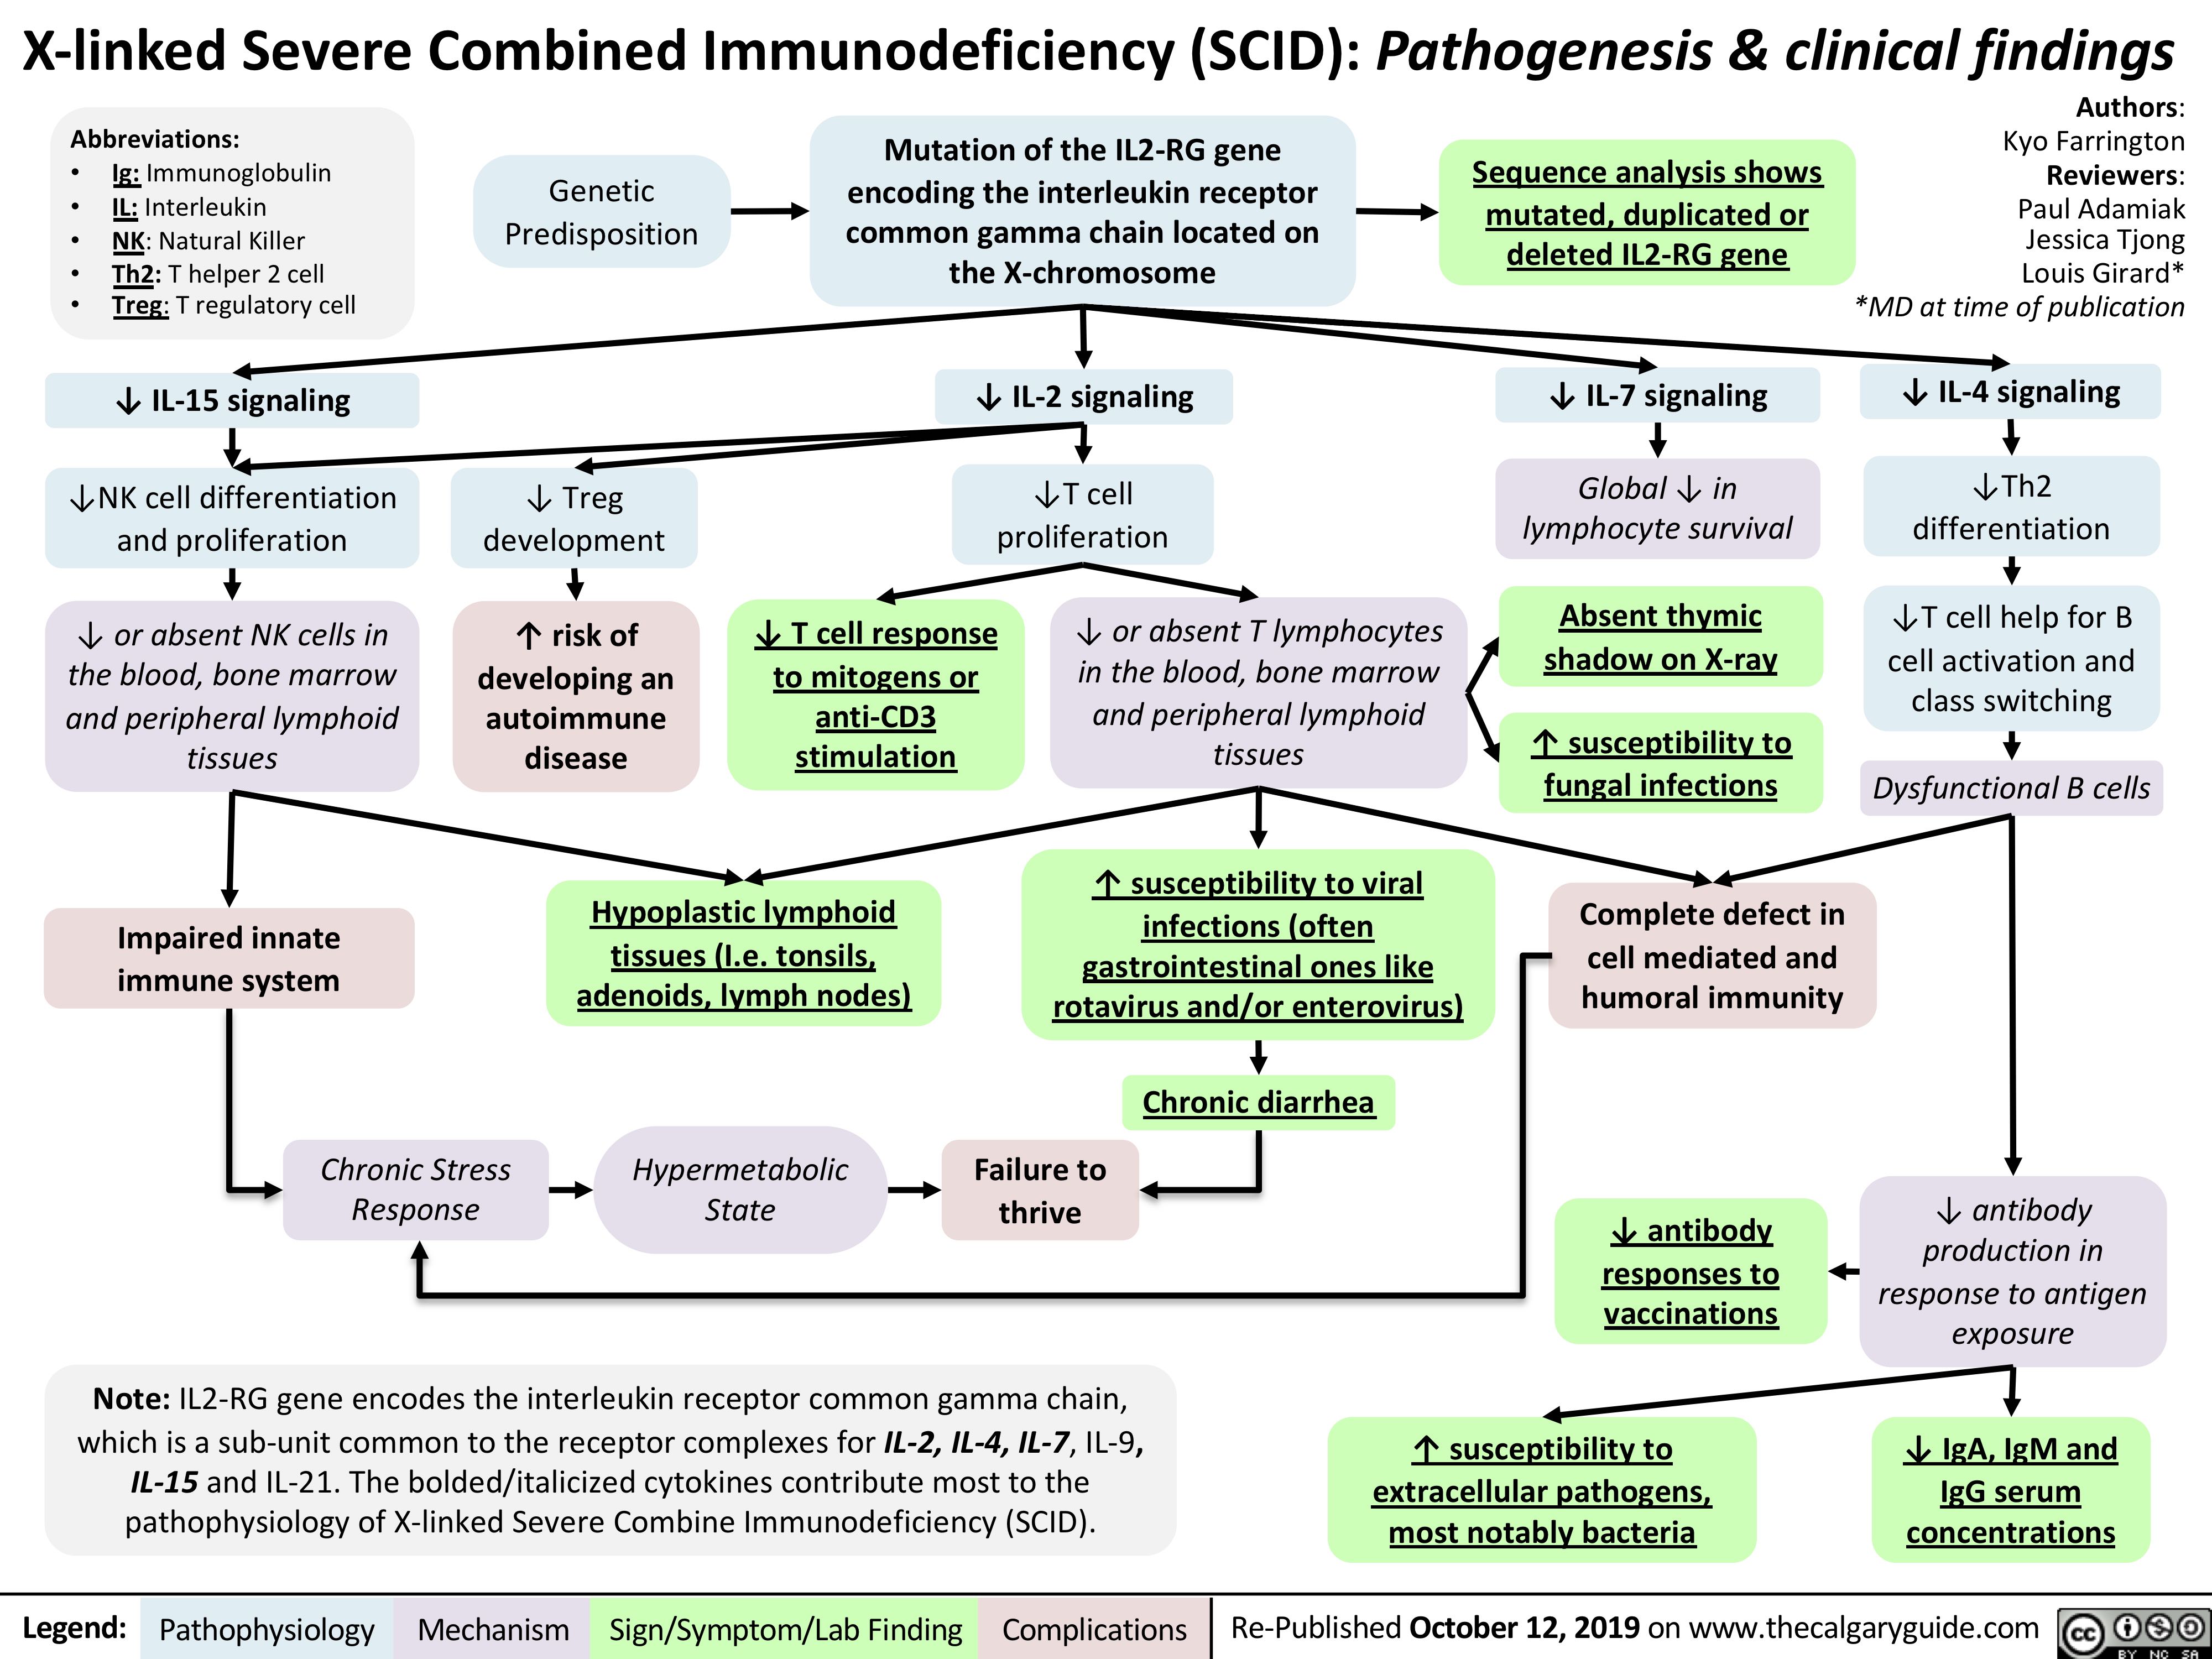 X-linked Severe Combined Immunodeficiency (SCID): Pathogenesis & clinical findings
  Abbreviations:
• Ig: Immunoglobulin
• IL: Interleukin
• NK: Natural Killer
• Th2: T helper 2 cell
• Treg: T regulatory cell
↓ IL-15 signaling ↓NK cell differentiation
and proliferation
↓ or absent NK cells in the blood, bone marrow and peripheral lymphoid tissues
Impaired innate immune system
Chronic Stress Response
Mutation of the IL2-RG gene encoding the interleukin receptor common gamma chain located on the X-chromosome
↓ IL-2 signaling ↓T cell
proliferation
Sequence analysis shows mutated, duplicated or deleted IL2-RG gene
↓ IL-7 signaling Global ↓ in
lymphocyte survival
Absent thymic shadow on X-ray
↑ susceptibility to fungal infections
Complete defect in cell mediated and humoral immunity
↓ antibody responses to vaccinations
↑ susceptibility to extracellular pathogens, most notably bacteria
Authors: Kyo Farrington Reviewers: Paul Adamiak Jessica Tjong Louis Girard* *MD at time of publication
↓ IL-4 signaling ↓Th2
differentiation
↓T cell help for B cell activation and class switching
Dysfunctional B cells
  Genetic Predisposition
↓ Treg development
↑ risk of developing an autoimmune disease
↓ T cell response to mitogens or
anti-CD3 stimulation
↓ or absent T lymphocytes in the blood, bone marrow and peripheral lymphoid tissues
↑ susceptibility to viral infections (often gastrointestinal ones like rotavirus and/or enterovirus)
Chronic diarrhea
                                                         Hypoplastic lymphoid tissues (I.e. tonsils, adenoids, lymph nodes)
Hypermetabolic State
Failure to thrive
↓ antibody production in response to antigen exposure
↓ IgA, IgM and IgG serum concentrations
                          Note: IL2-RG gene encodes the interleukin receptor common gamma chain, which is a sub-unit common to the receptor complexes for IL-2, IL-4, IL-7, IL-9,
IL-15 and IL-21. The bolded/italicized cytokines contribute most to the pathophysiology of X-linked Severe Combine Immunodeficiency (SCID).
     Legend:
 Pathophysiology
 Mechanism
Sign/Symptom/Lab Finding
  Complications
Re-Published October 12, 2019 on www.thecalgaryguide.com
   